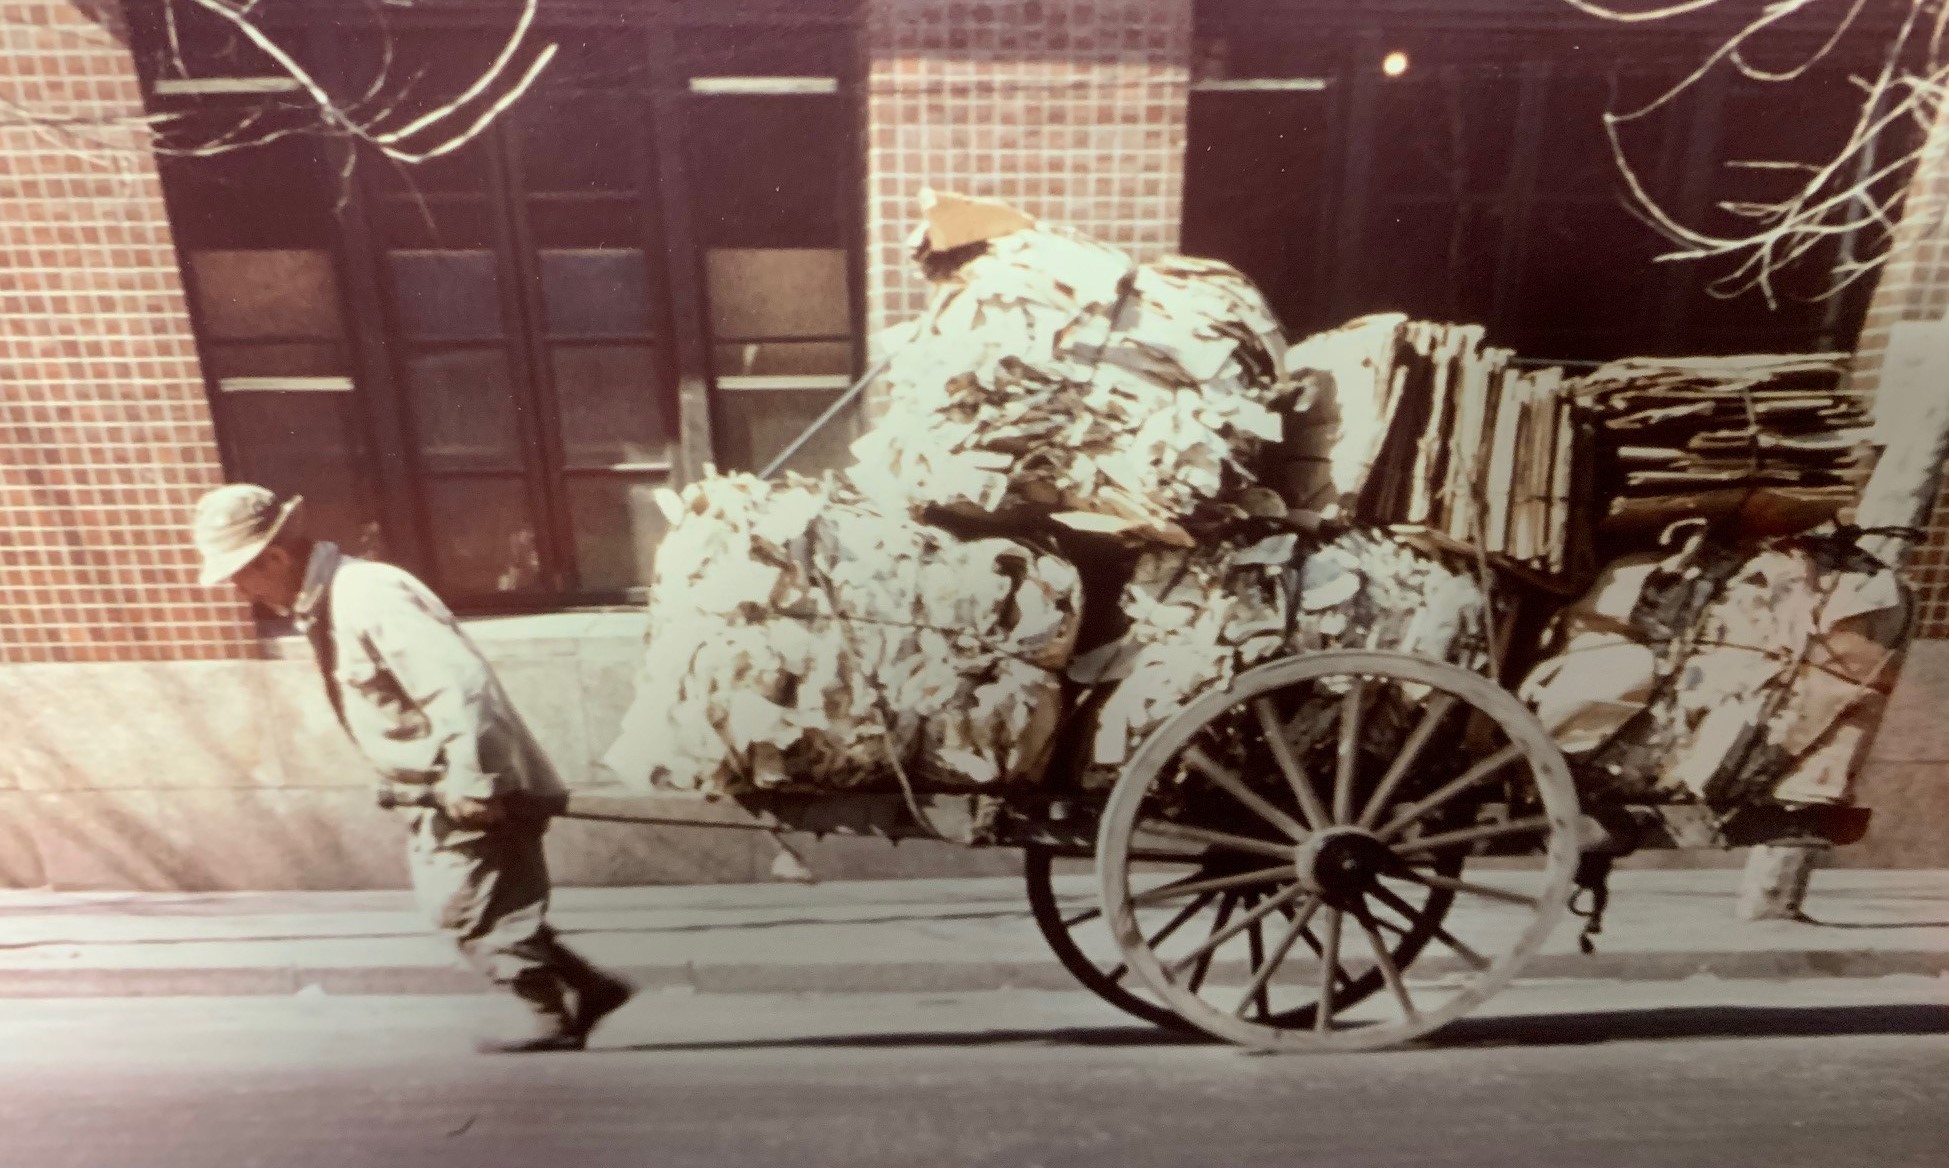 Recycling in Massachusetts has come a long way from a man pulling a cart filled with bundles of paper and cardboard.